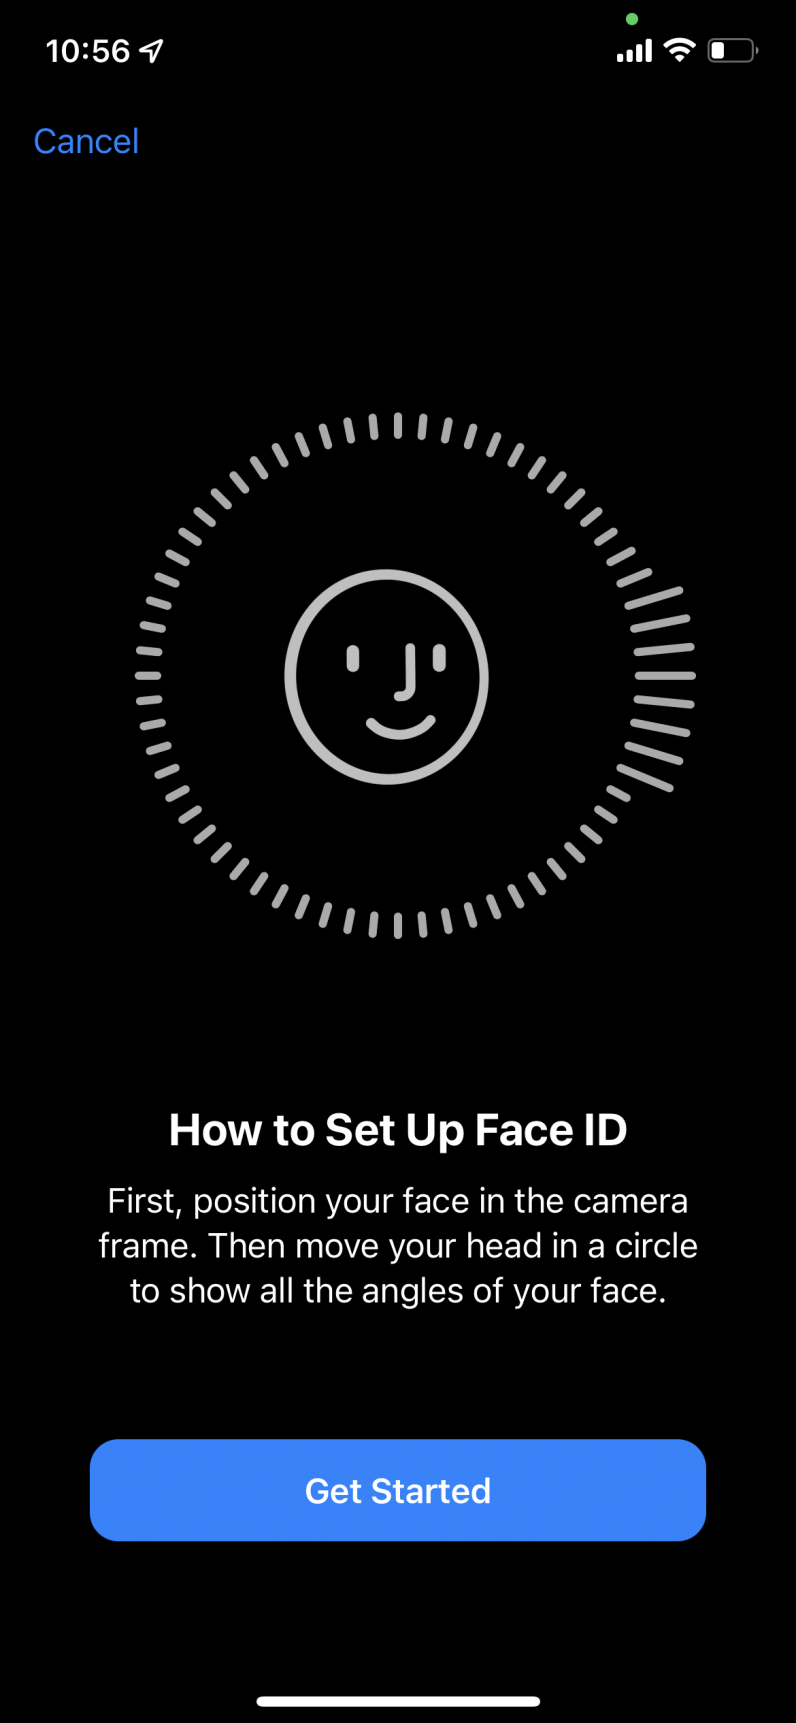 You have to register a new face scan without a mask.